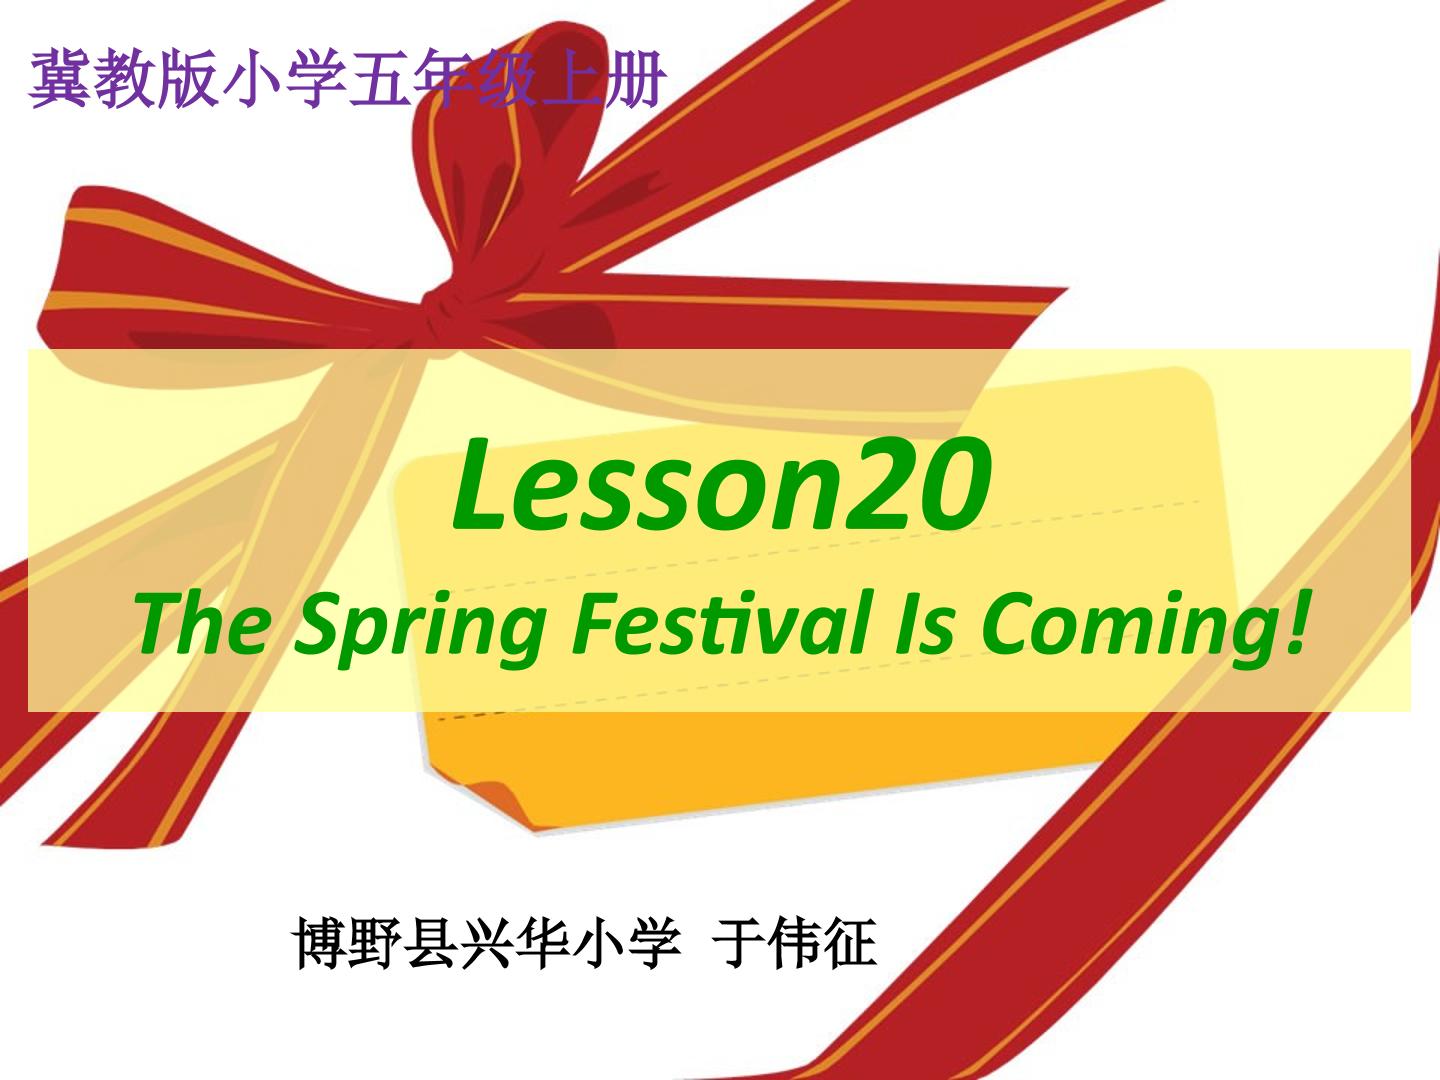 Lesson 20 The Spring Festival Is Coming!